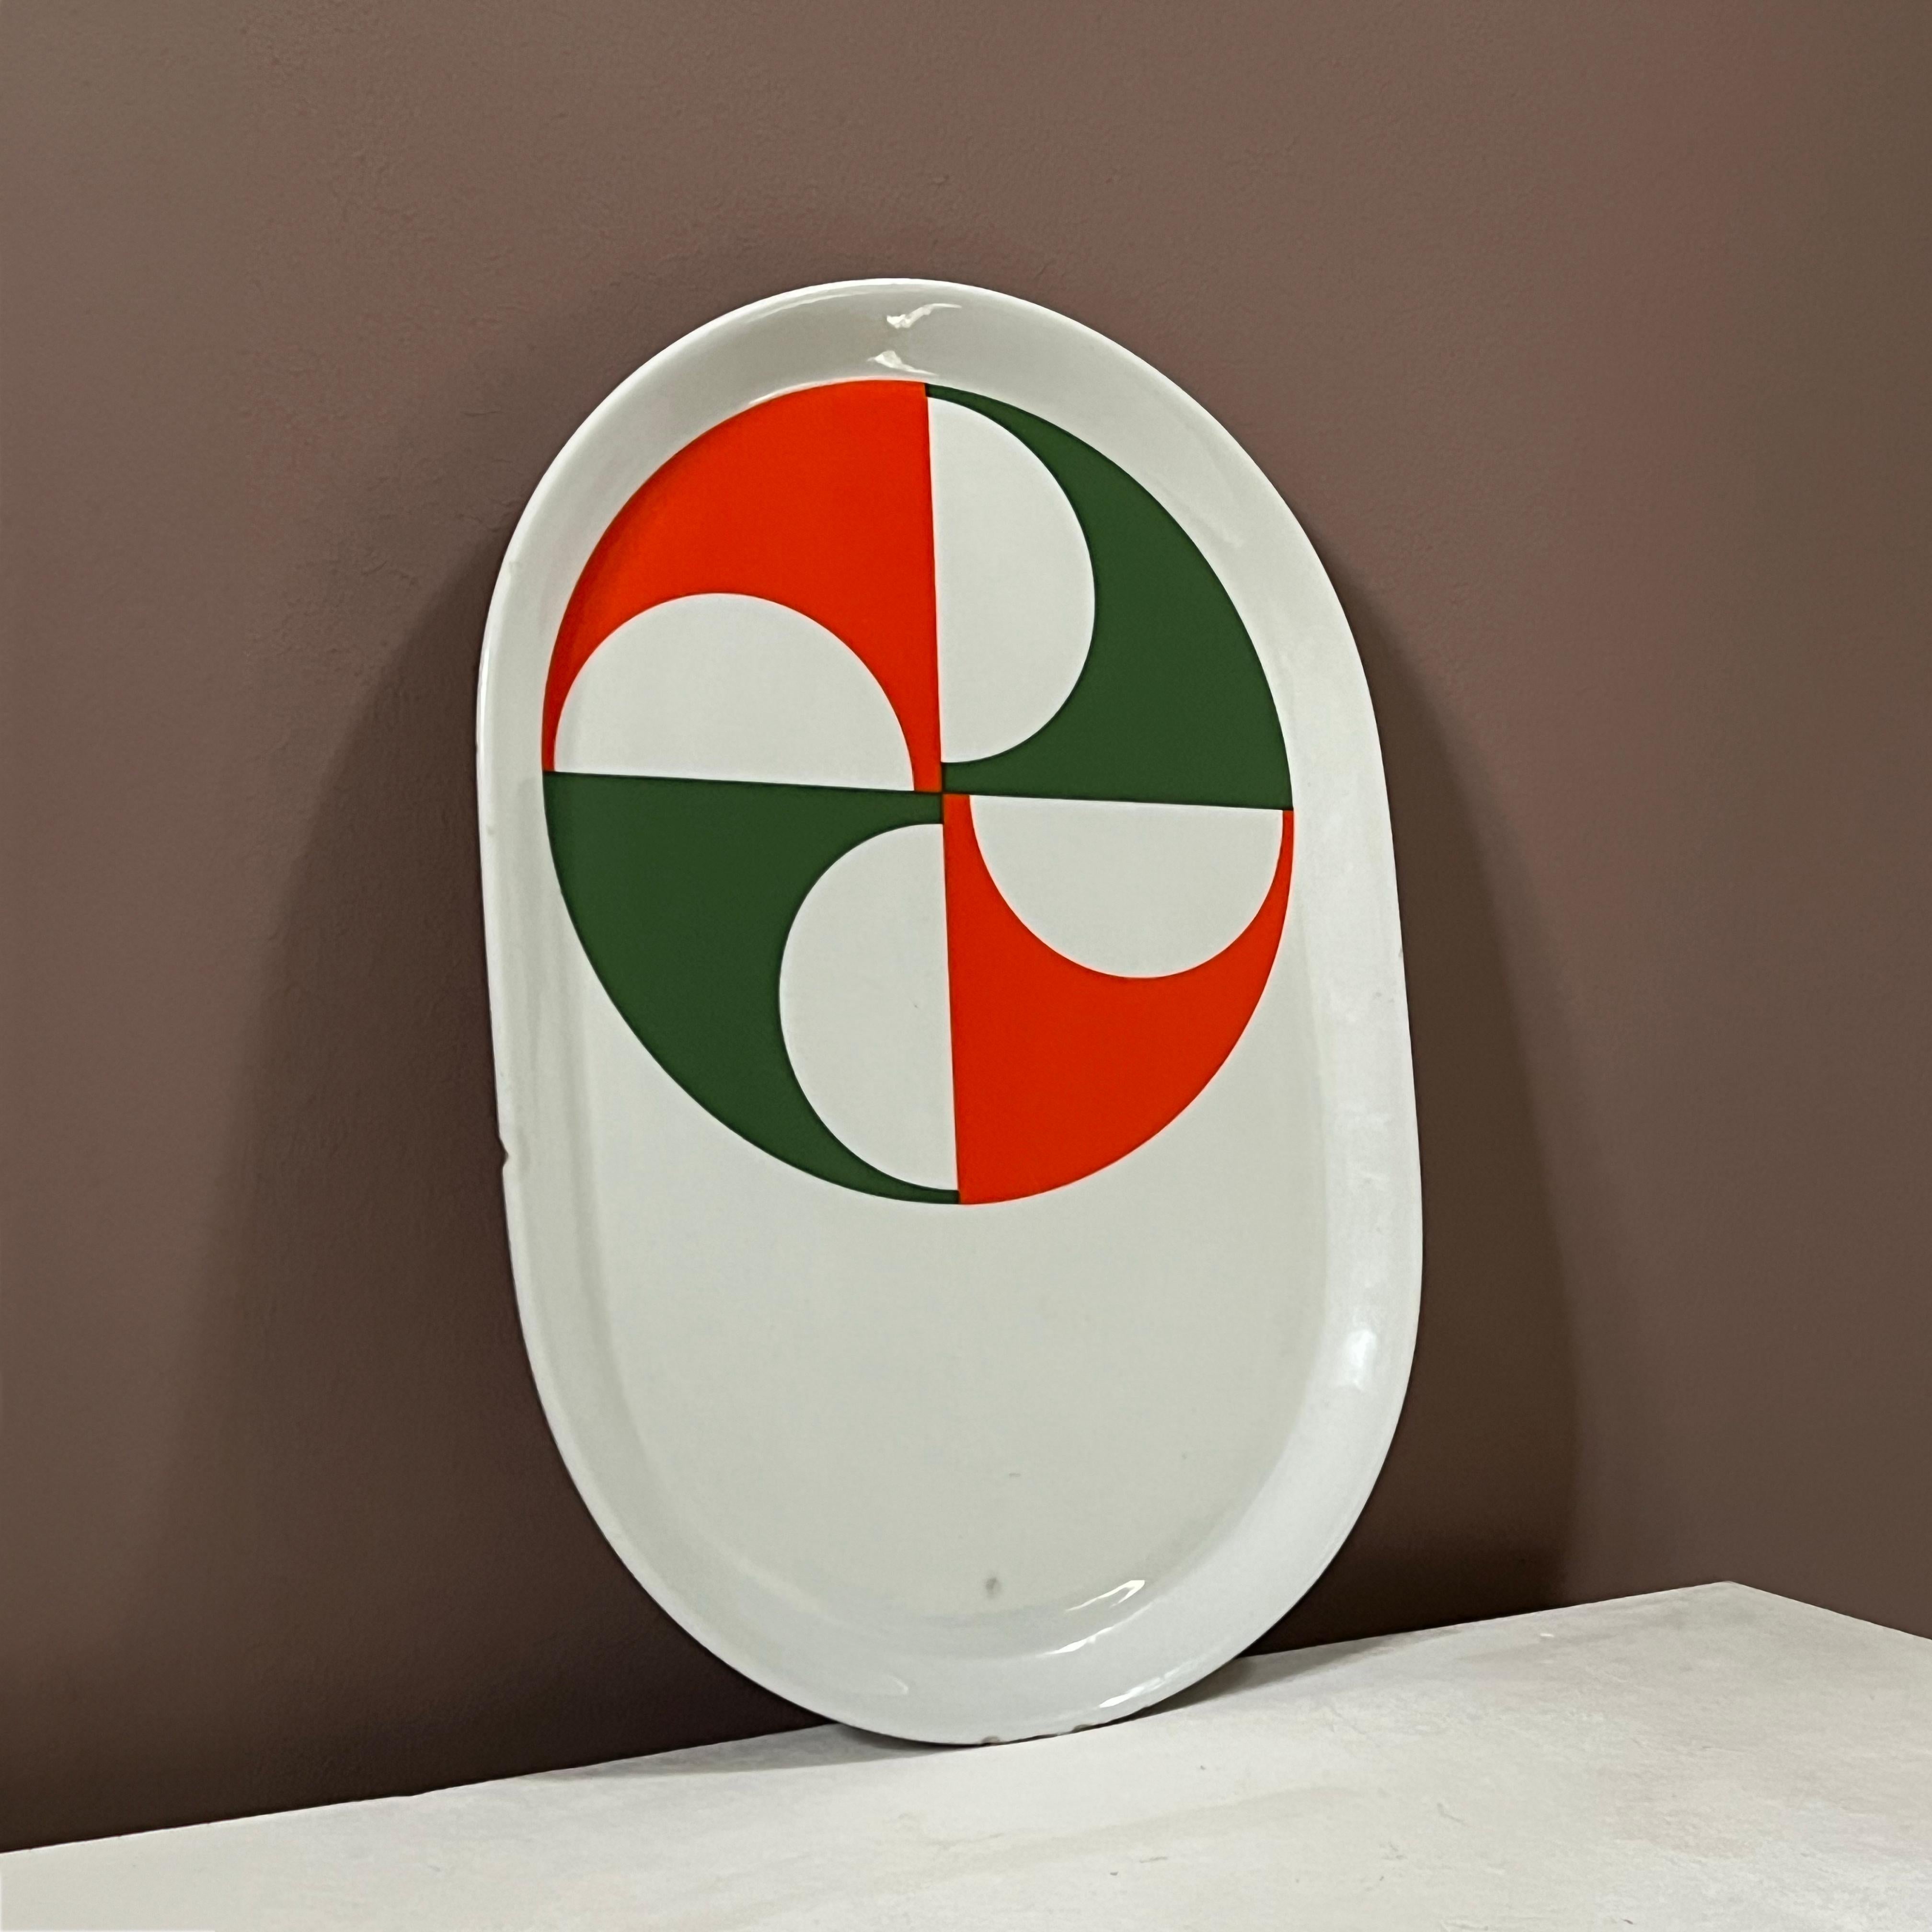 This serving plate manufactured by Ceramiche Franco Pozzi in Italy in the 1960s, is part of the renewed 